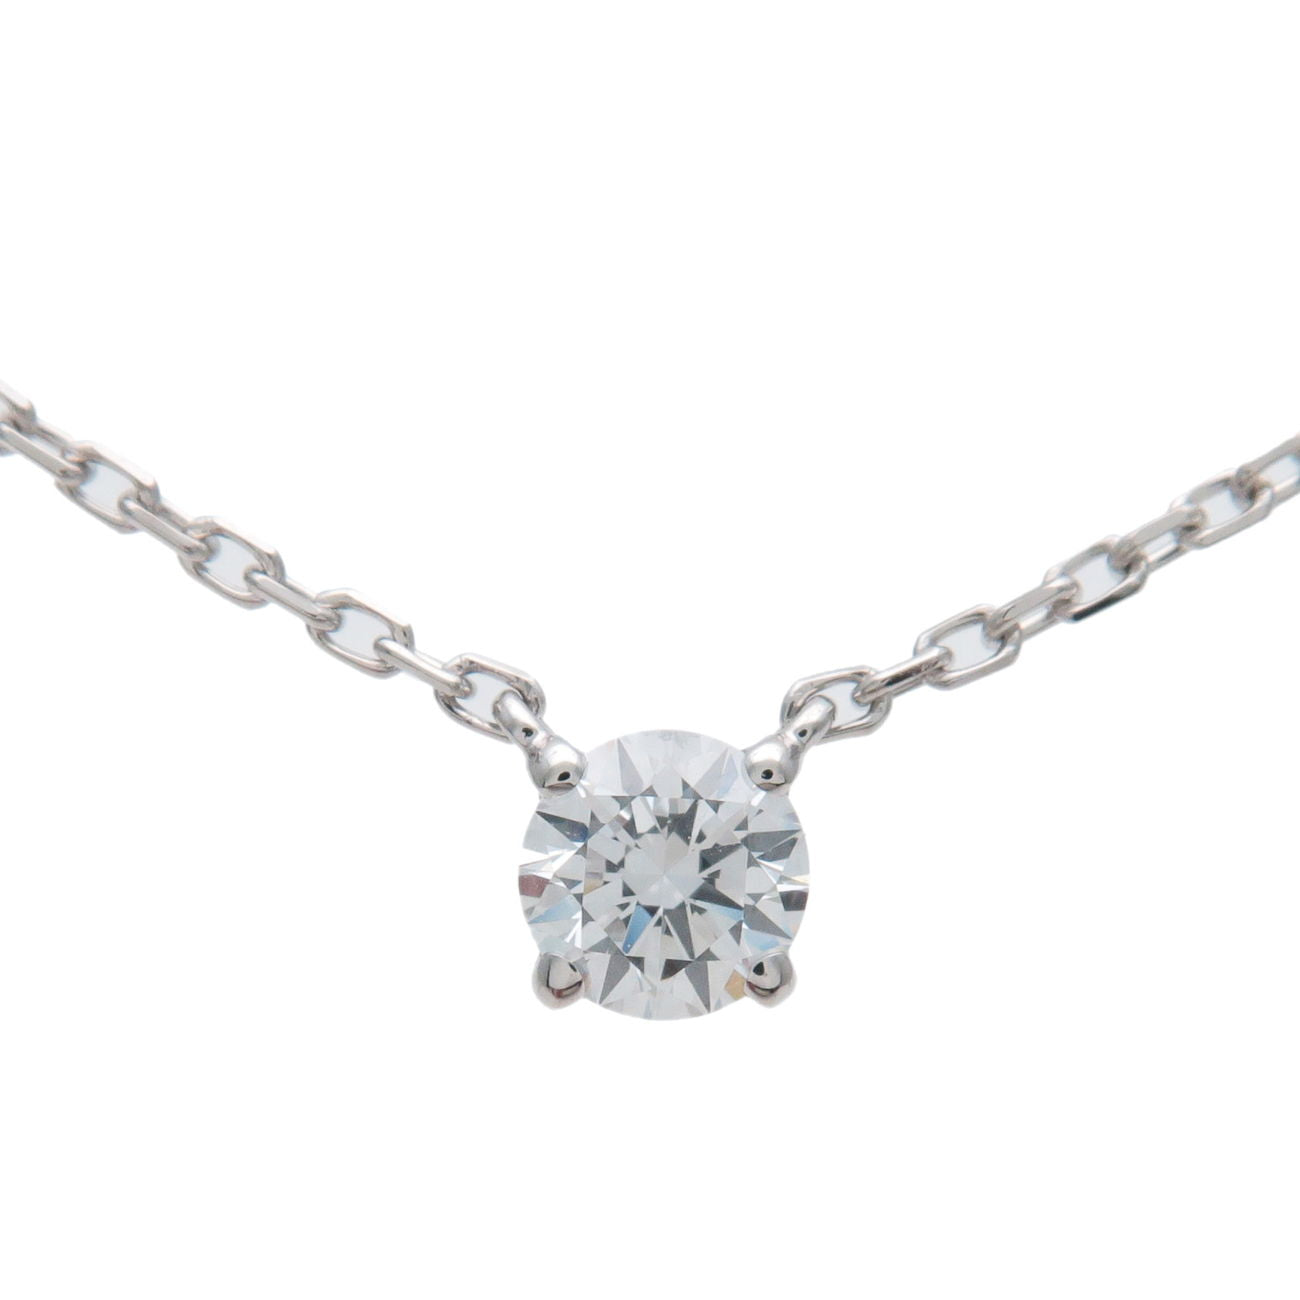 Cartier-Love-Support-Diamond-Necklace-0.20ct-K18WG-750-White-Gold